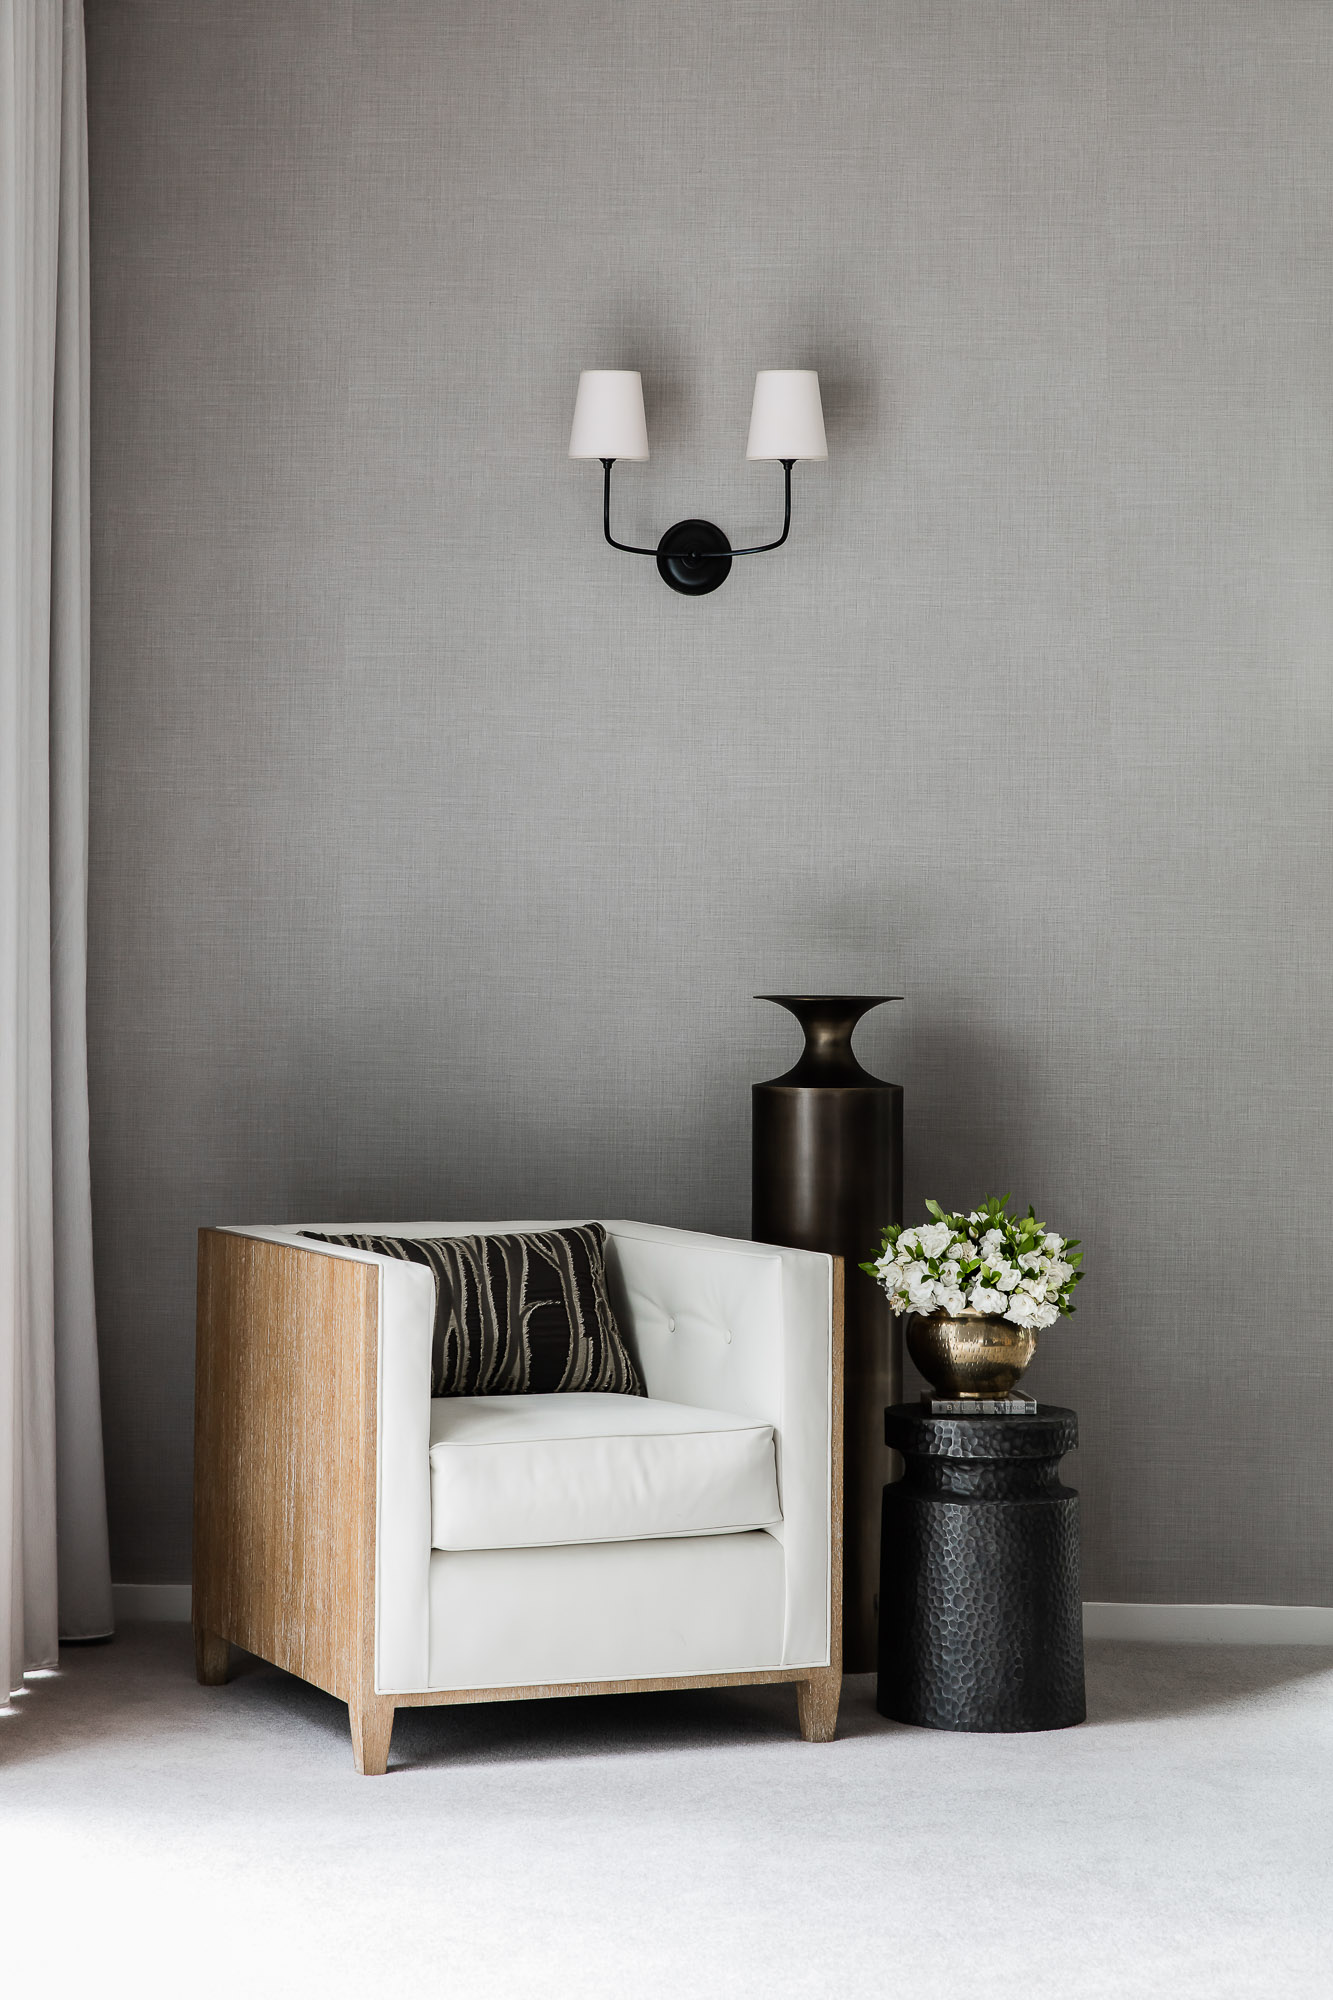 Bedroom with Coco Republic armchair, double wall sconce and bronze vase by Sydney interior designers, Brendan Wong Design